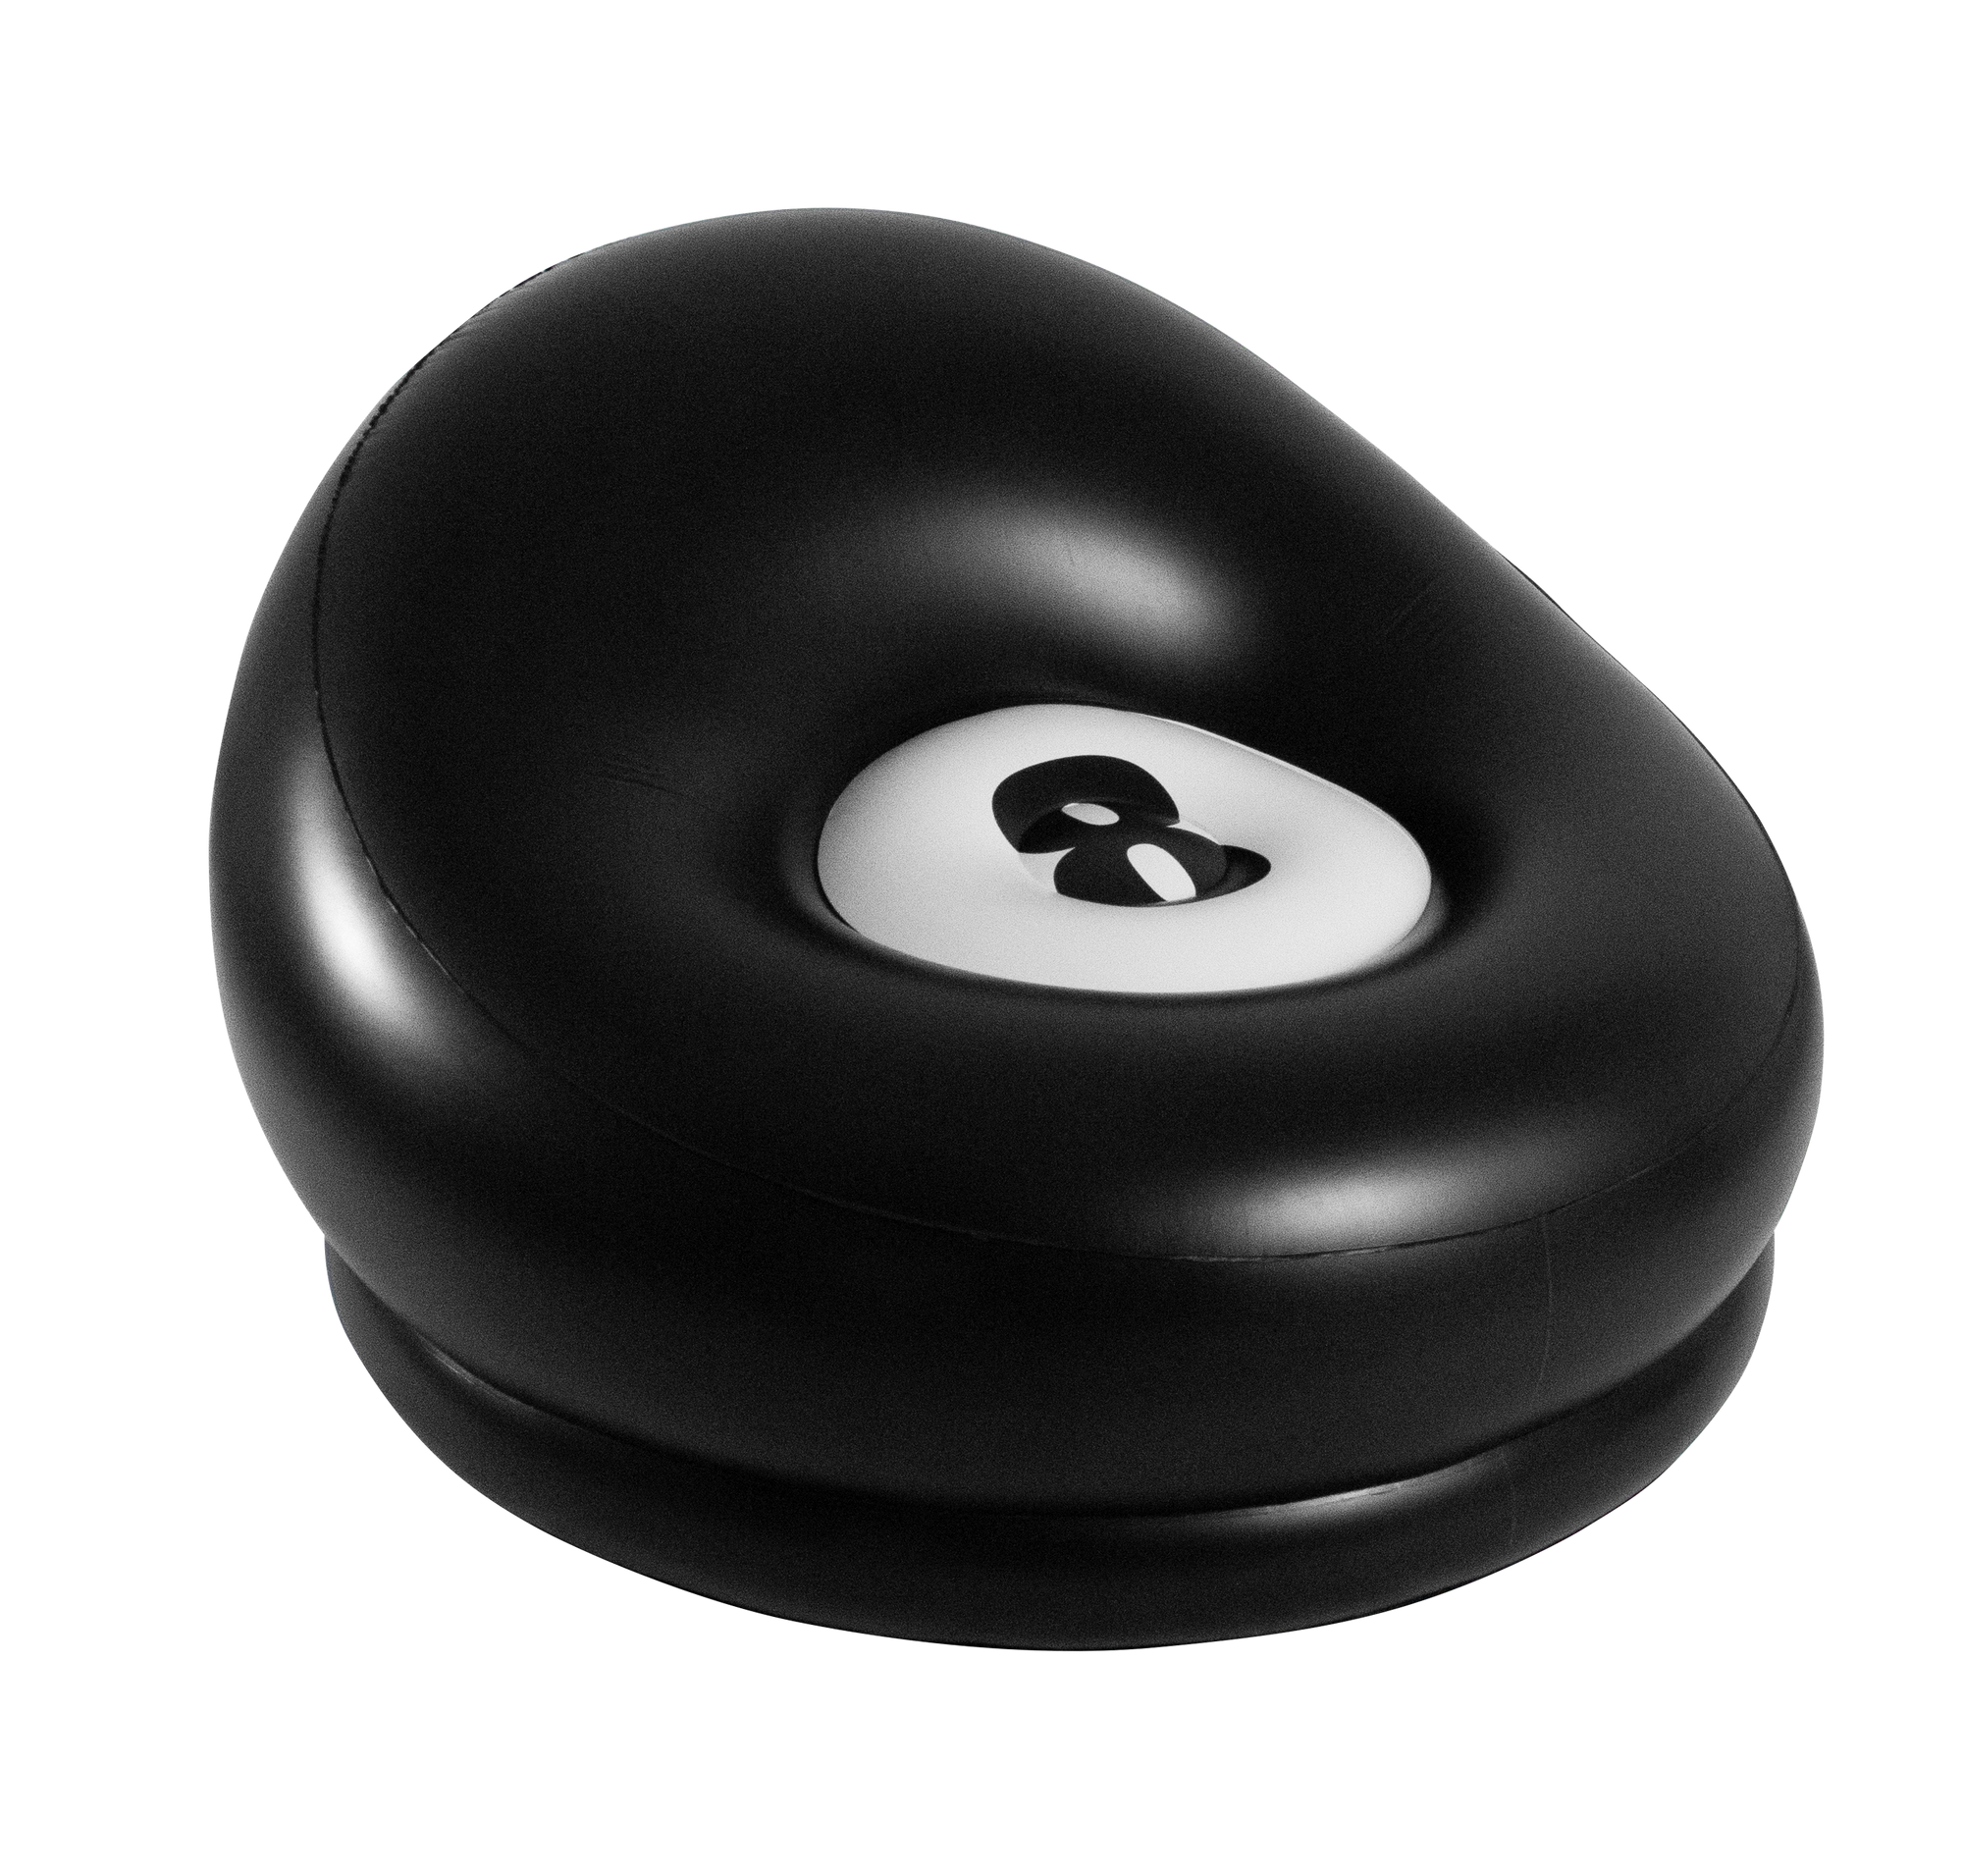 Air Candy - 8-Ball Inflatable Chair